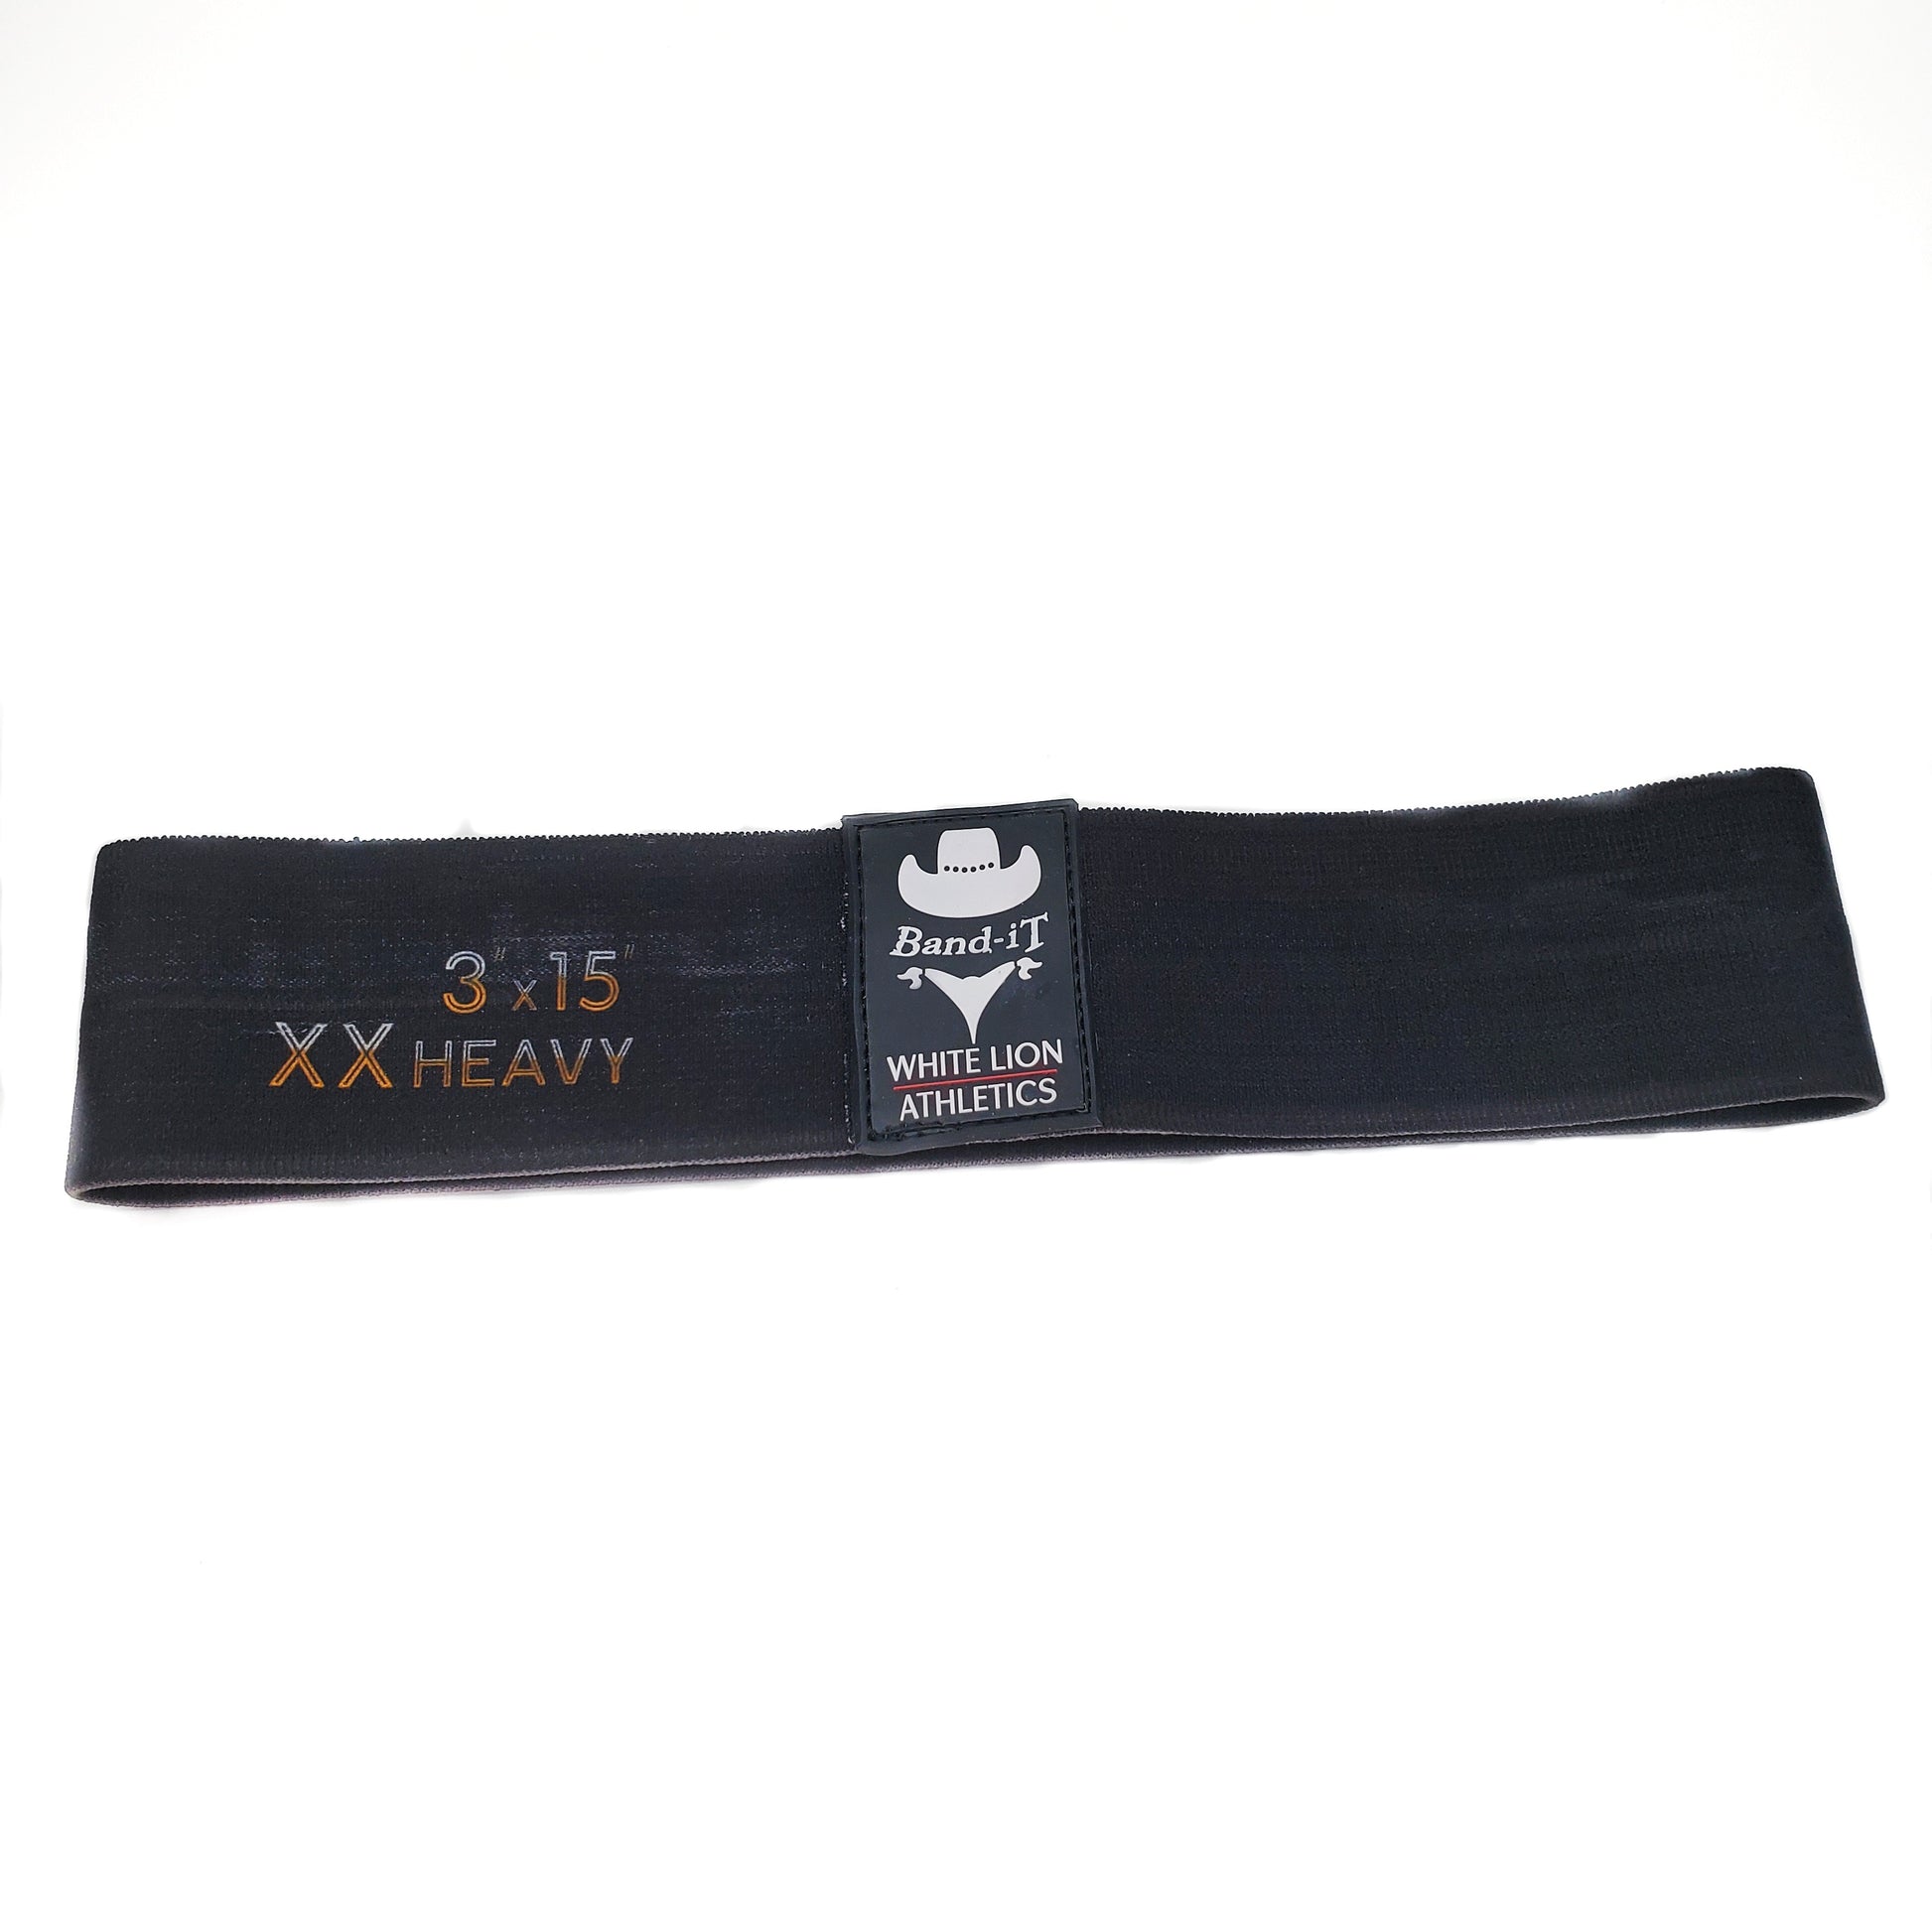 Glute Bands - Classic Black | Non-Slip Fabric Resistance Bands| 3 Sizes, 3 Strengths (CLASSIC BLACK) - White Lion Athletics